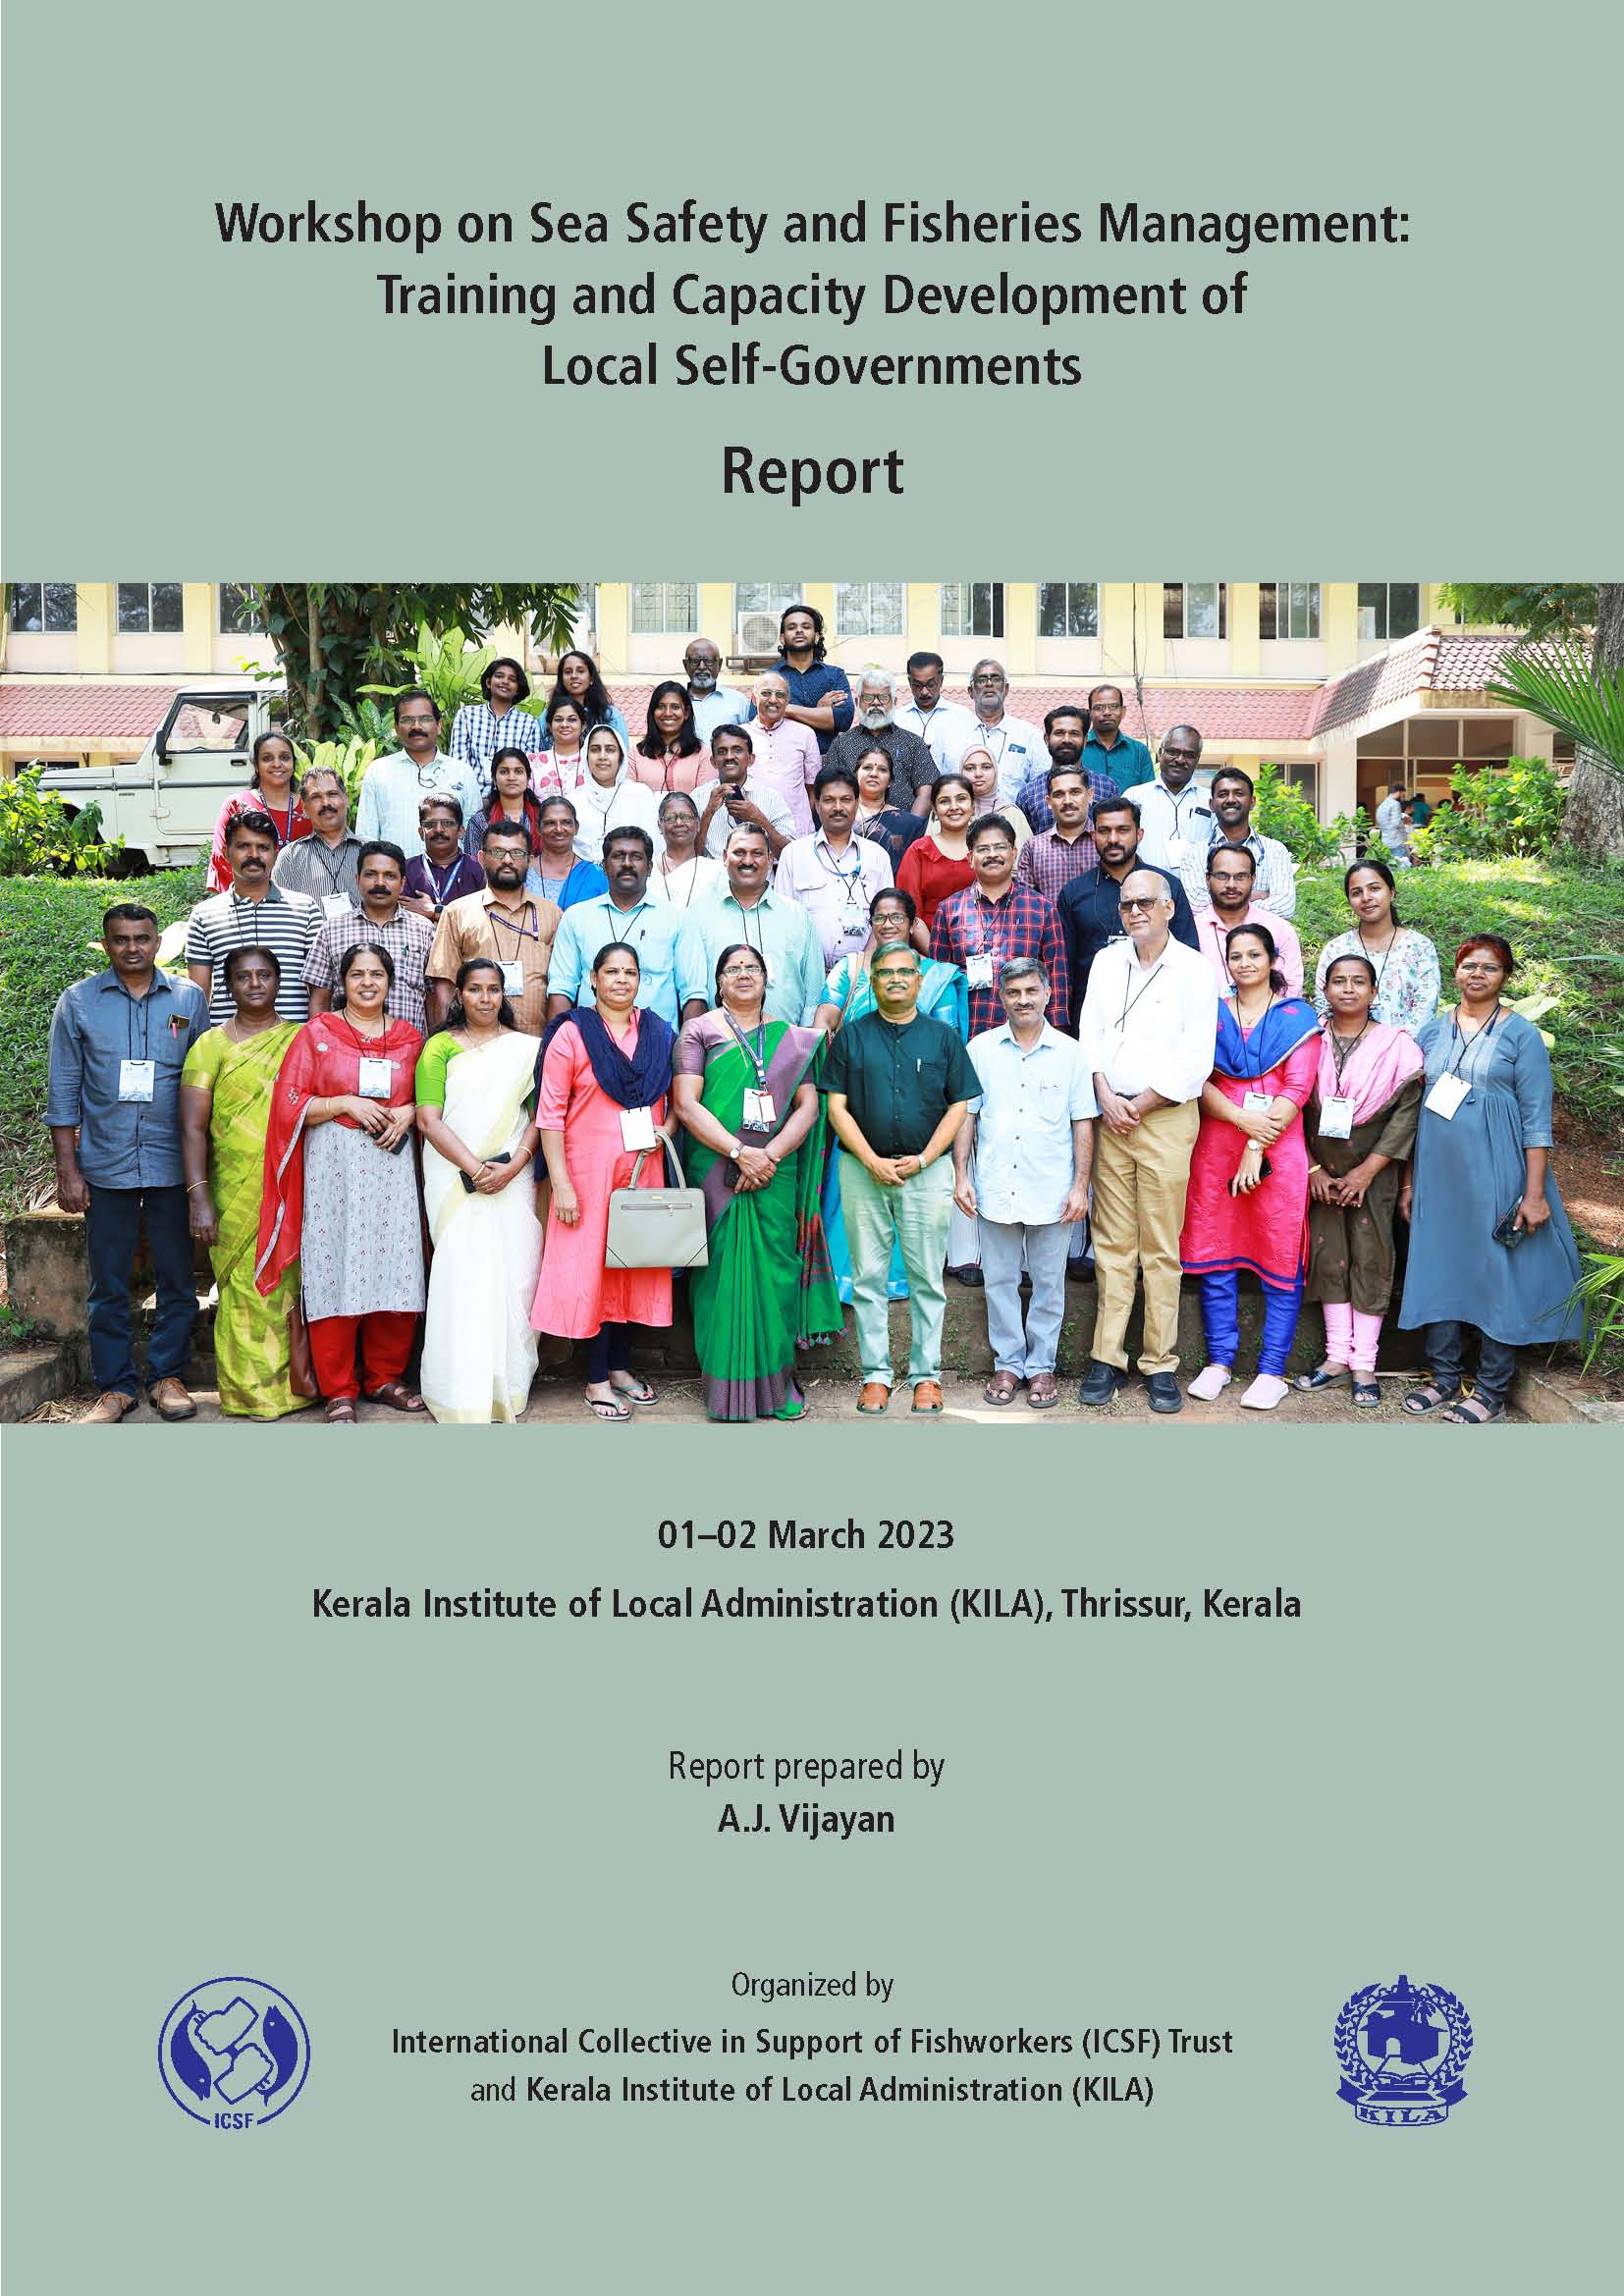 Report of the Workshop on Sea Safety and Fisheries Management: Training and Capacity Development of Local Self-Governments, 01–02 March 2023, Thrissur, Kerala Report prepared by A.J. Vijayan